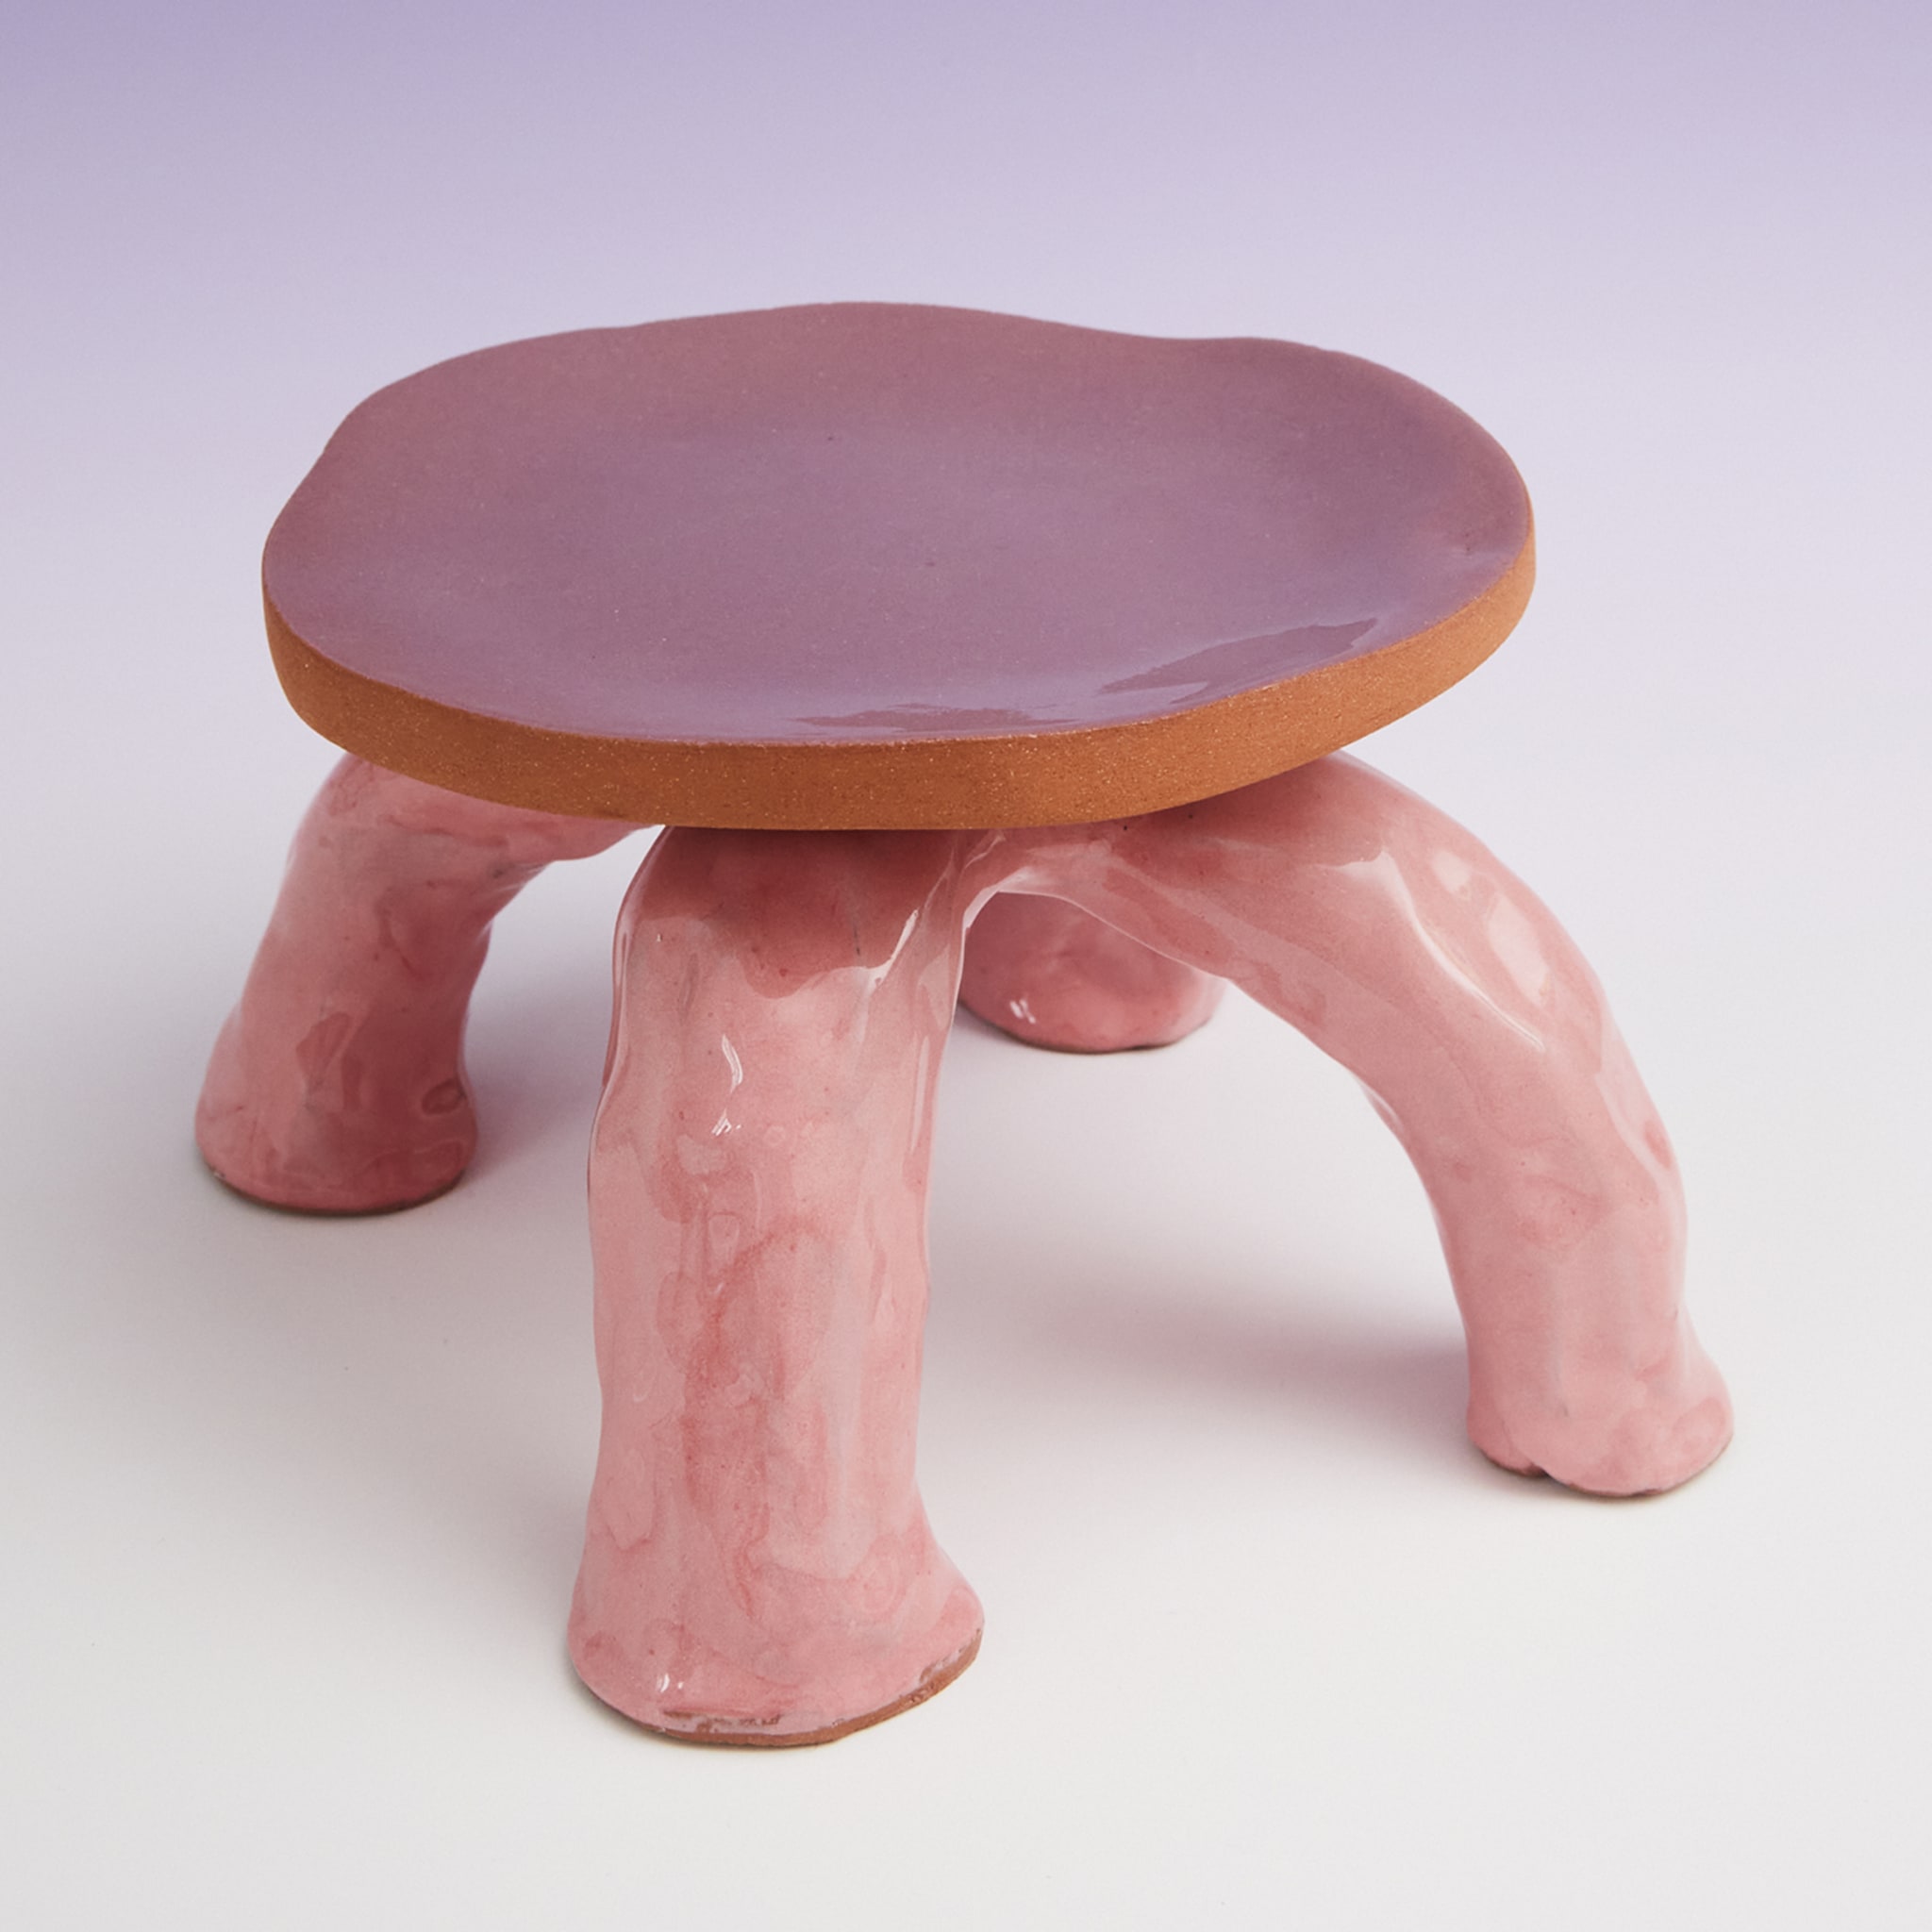 Fungo 4-legged Pink and Lilac Cake Stand - Alternative view 5